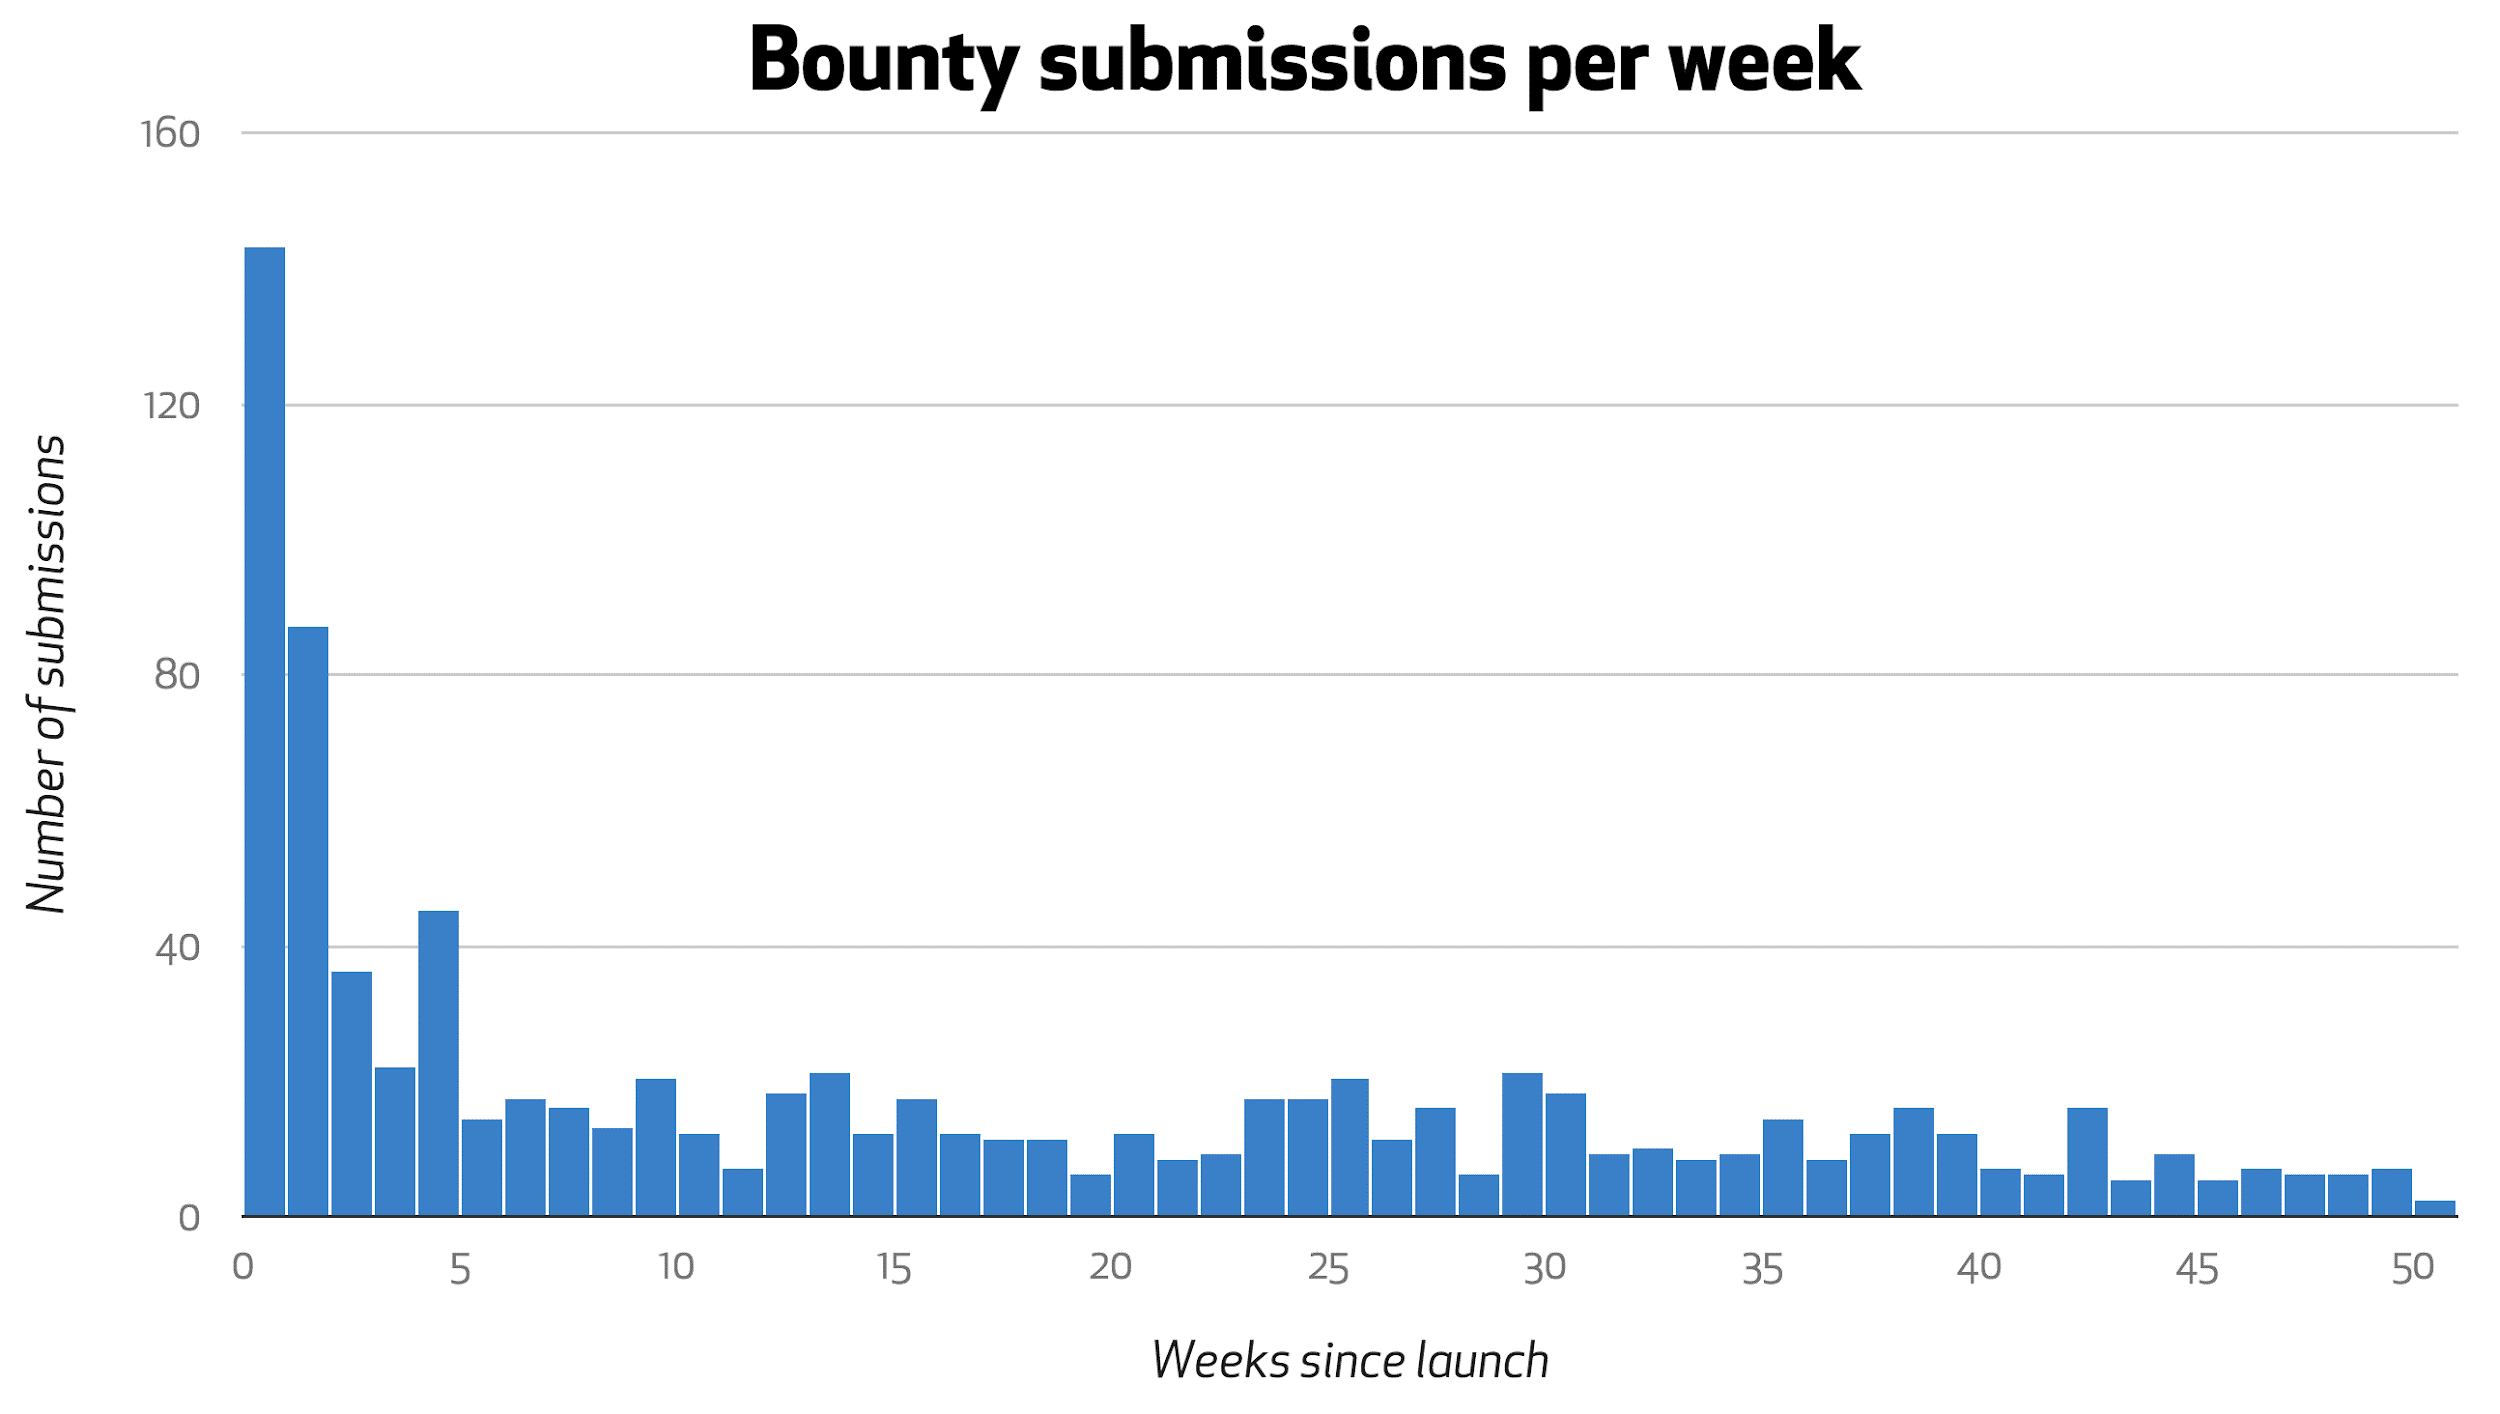 Bounty submissions per week